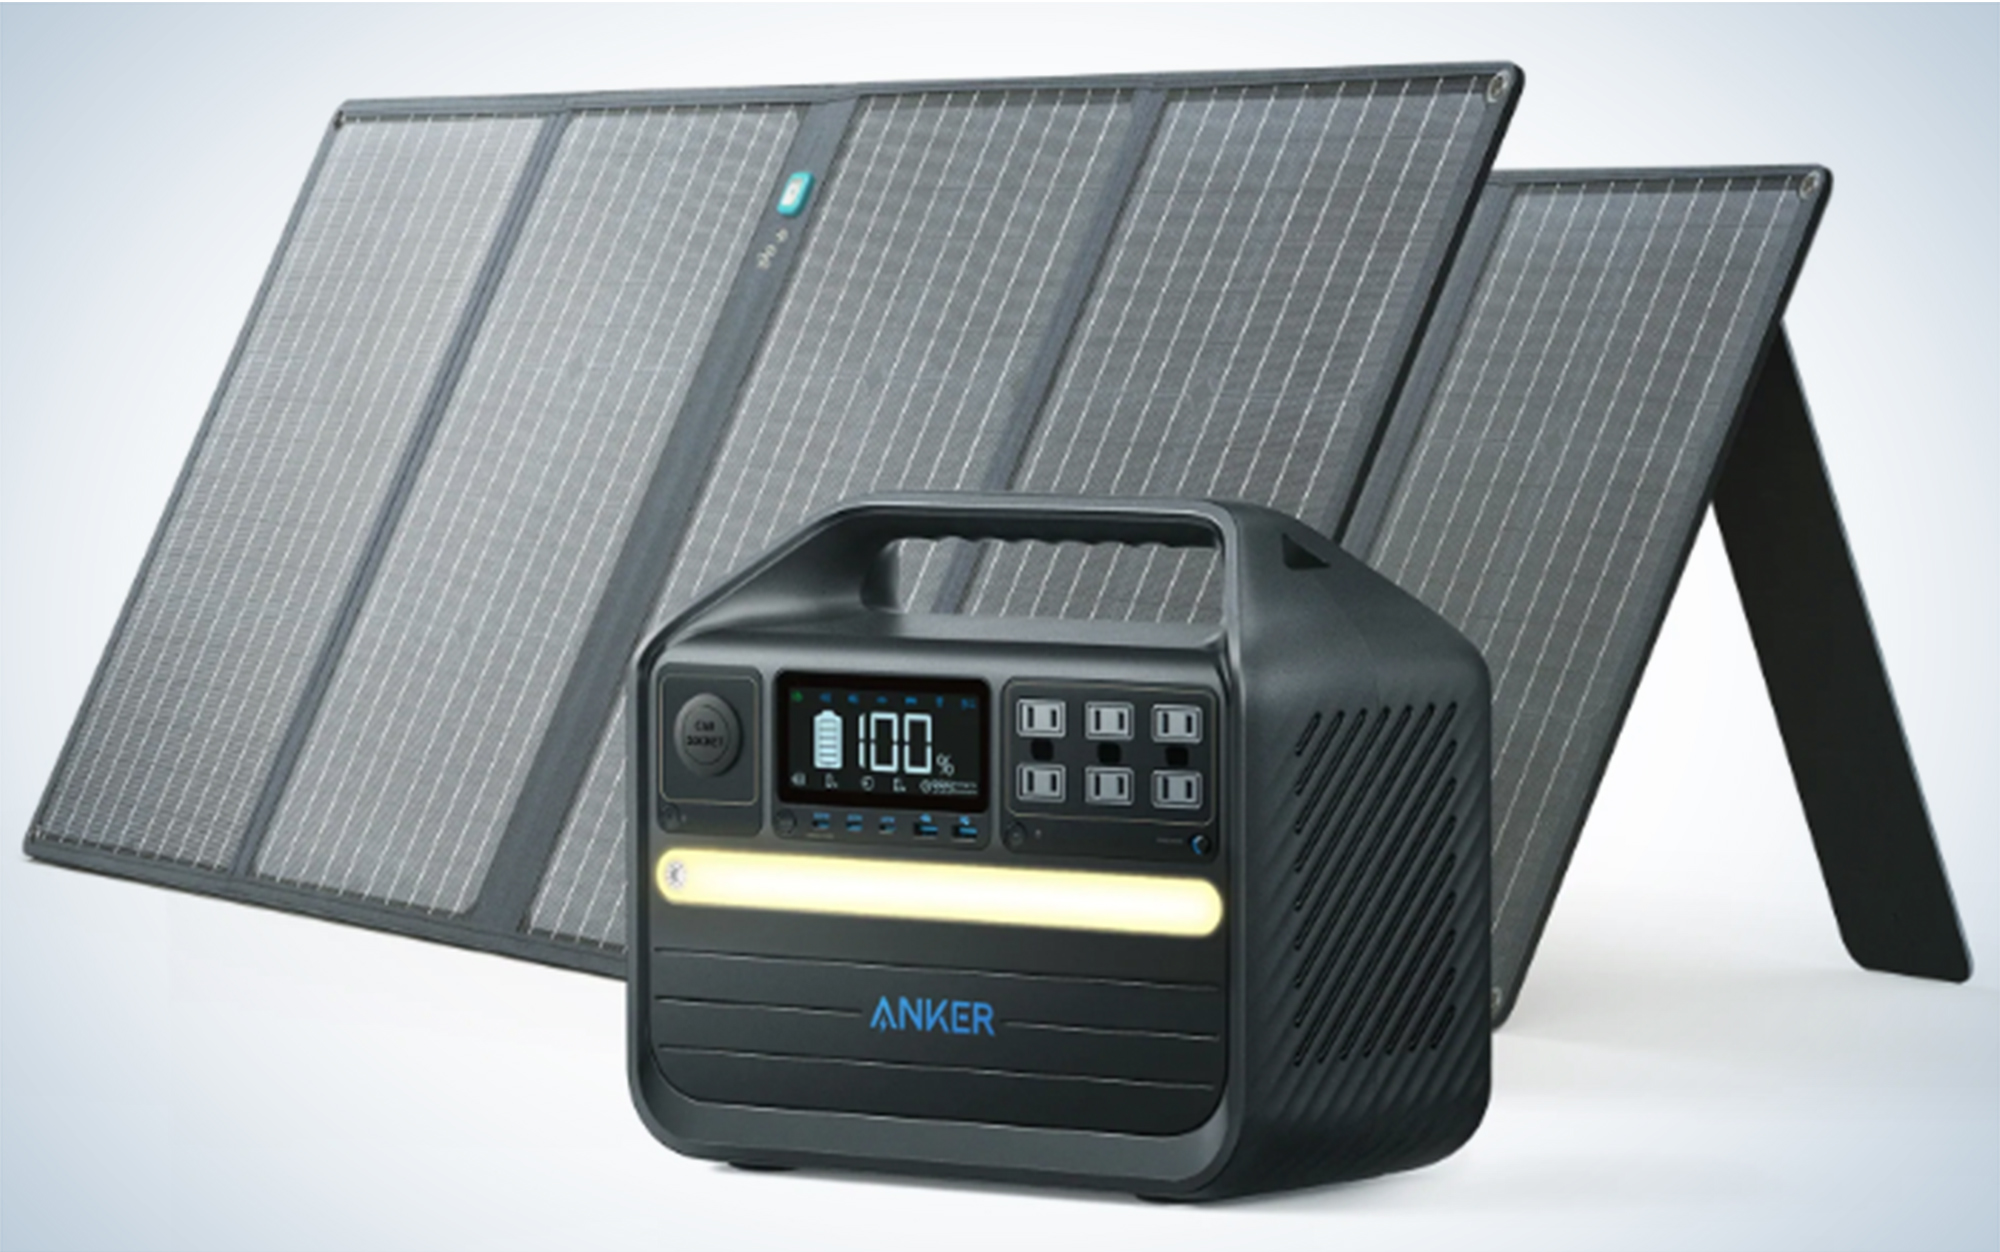 The Anker 555 is the best budget power station.